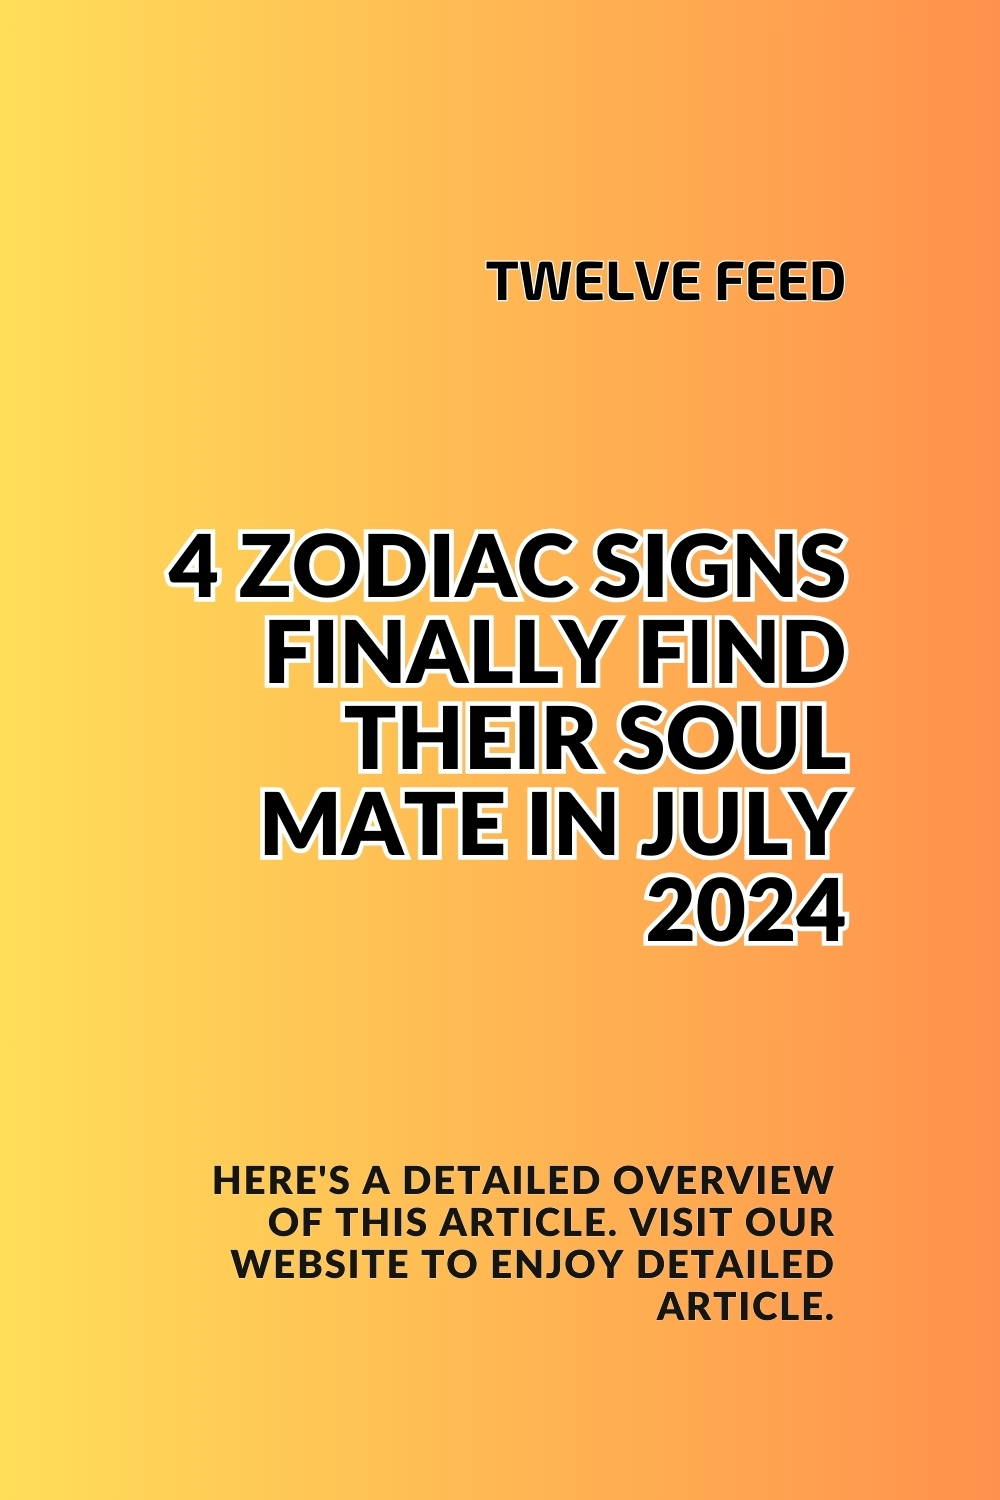 4 Zodiac Signs Finally Find Their Soul Mate In July 2024